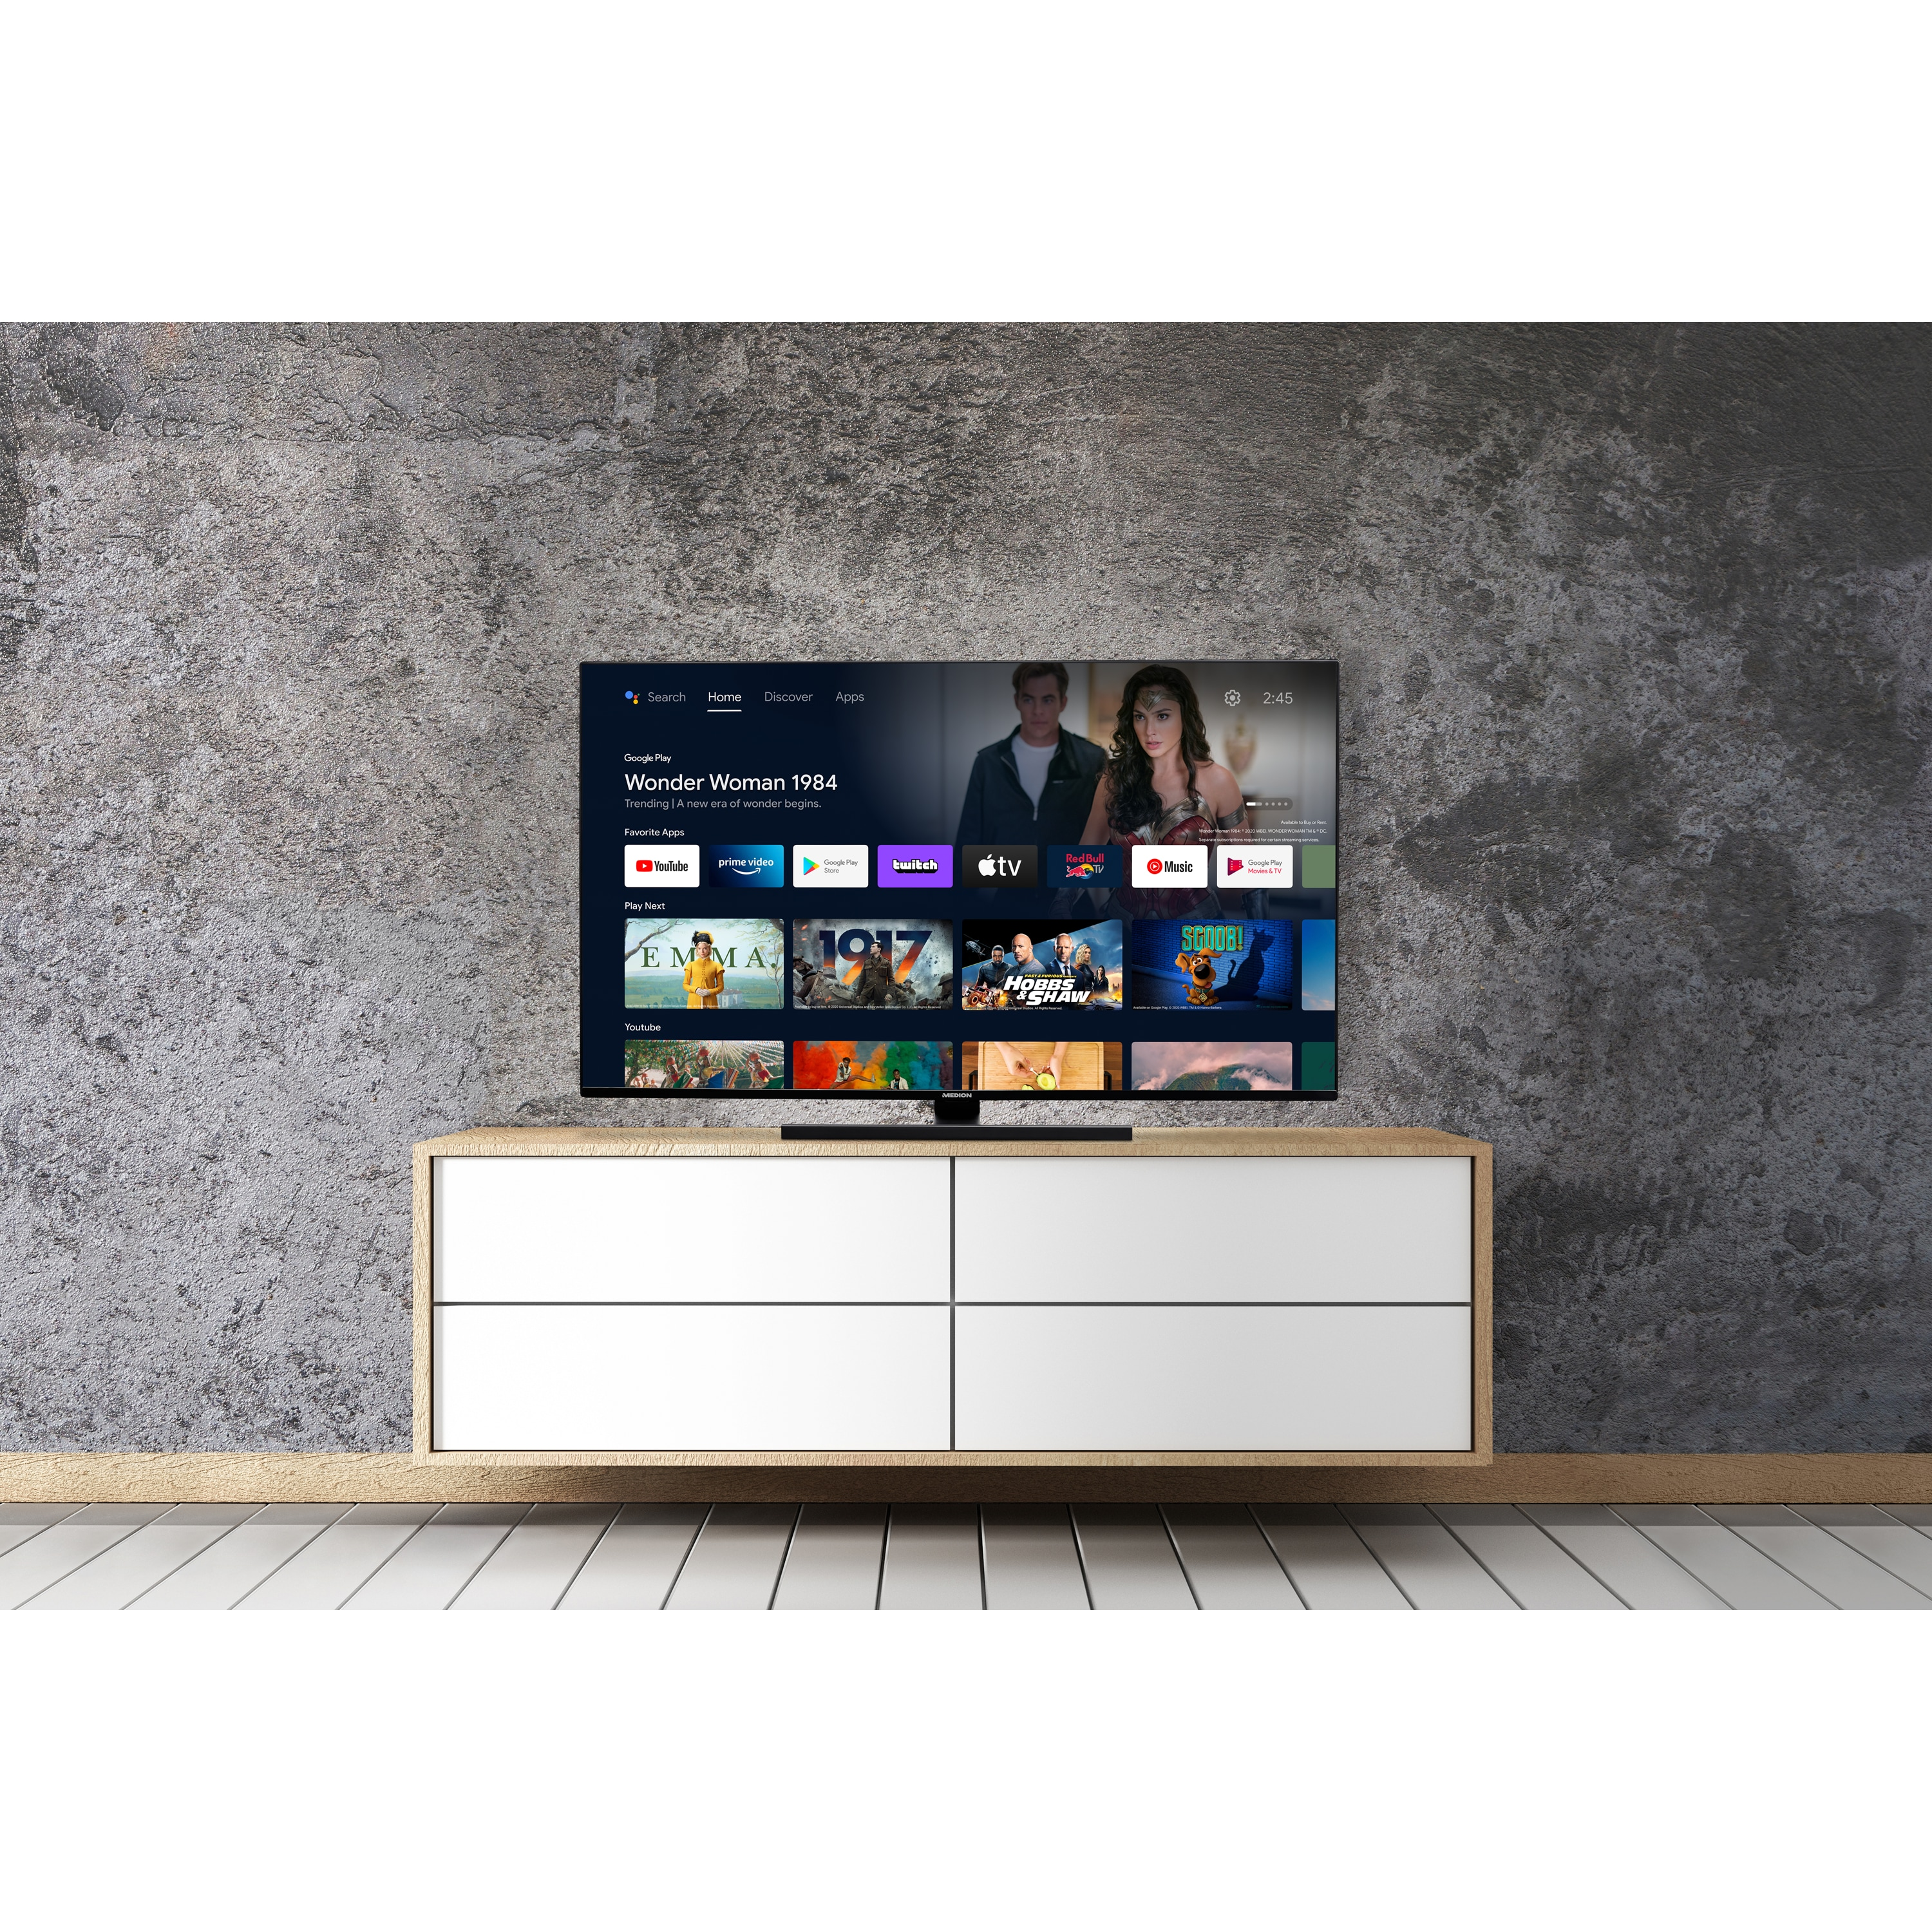 QLED cm, 125,7 Zoll Android) / 49,5 4K, LIFE® (Flat, MEDION X15048 Fernseher